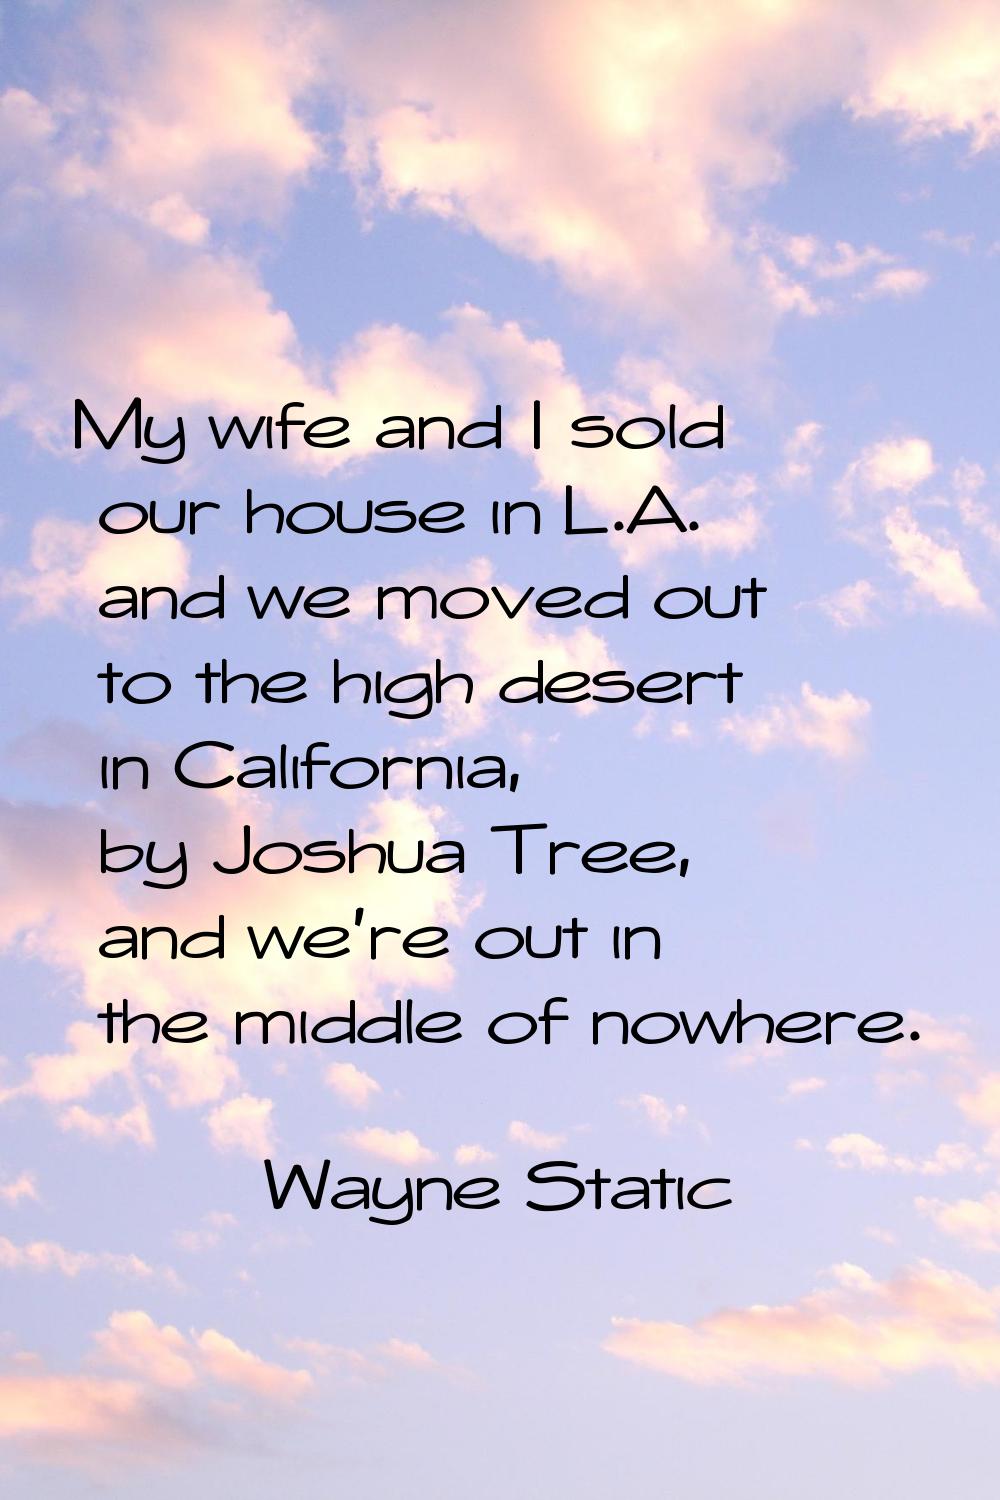 My wife and I sold our house in L.A. and we moved out to the high desert in California, by Joshua T